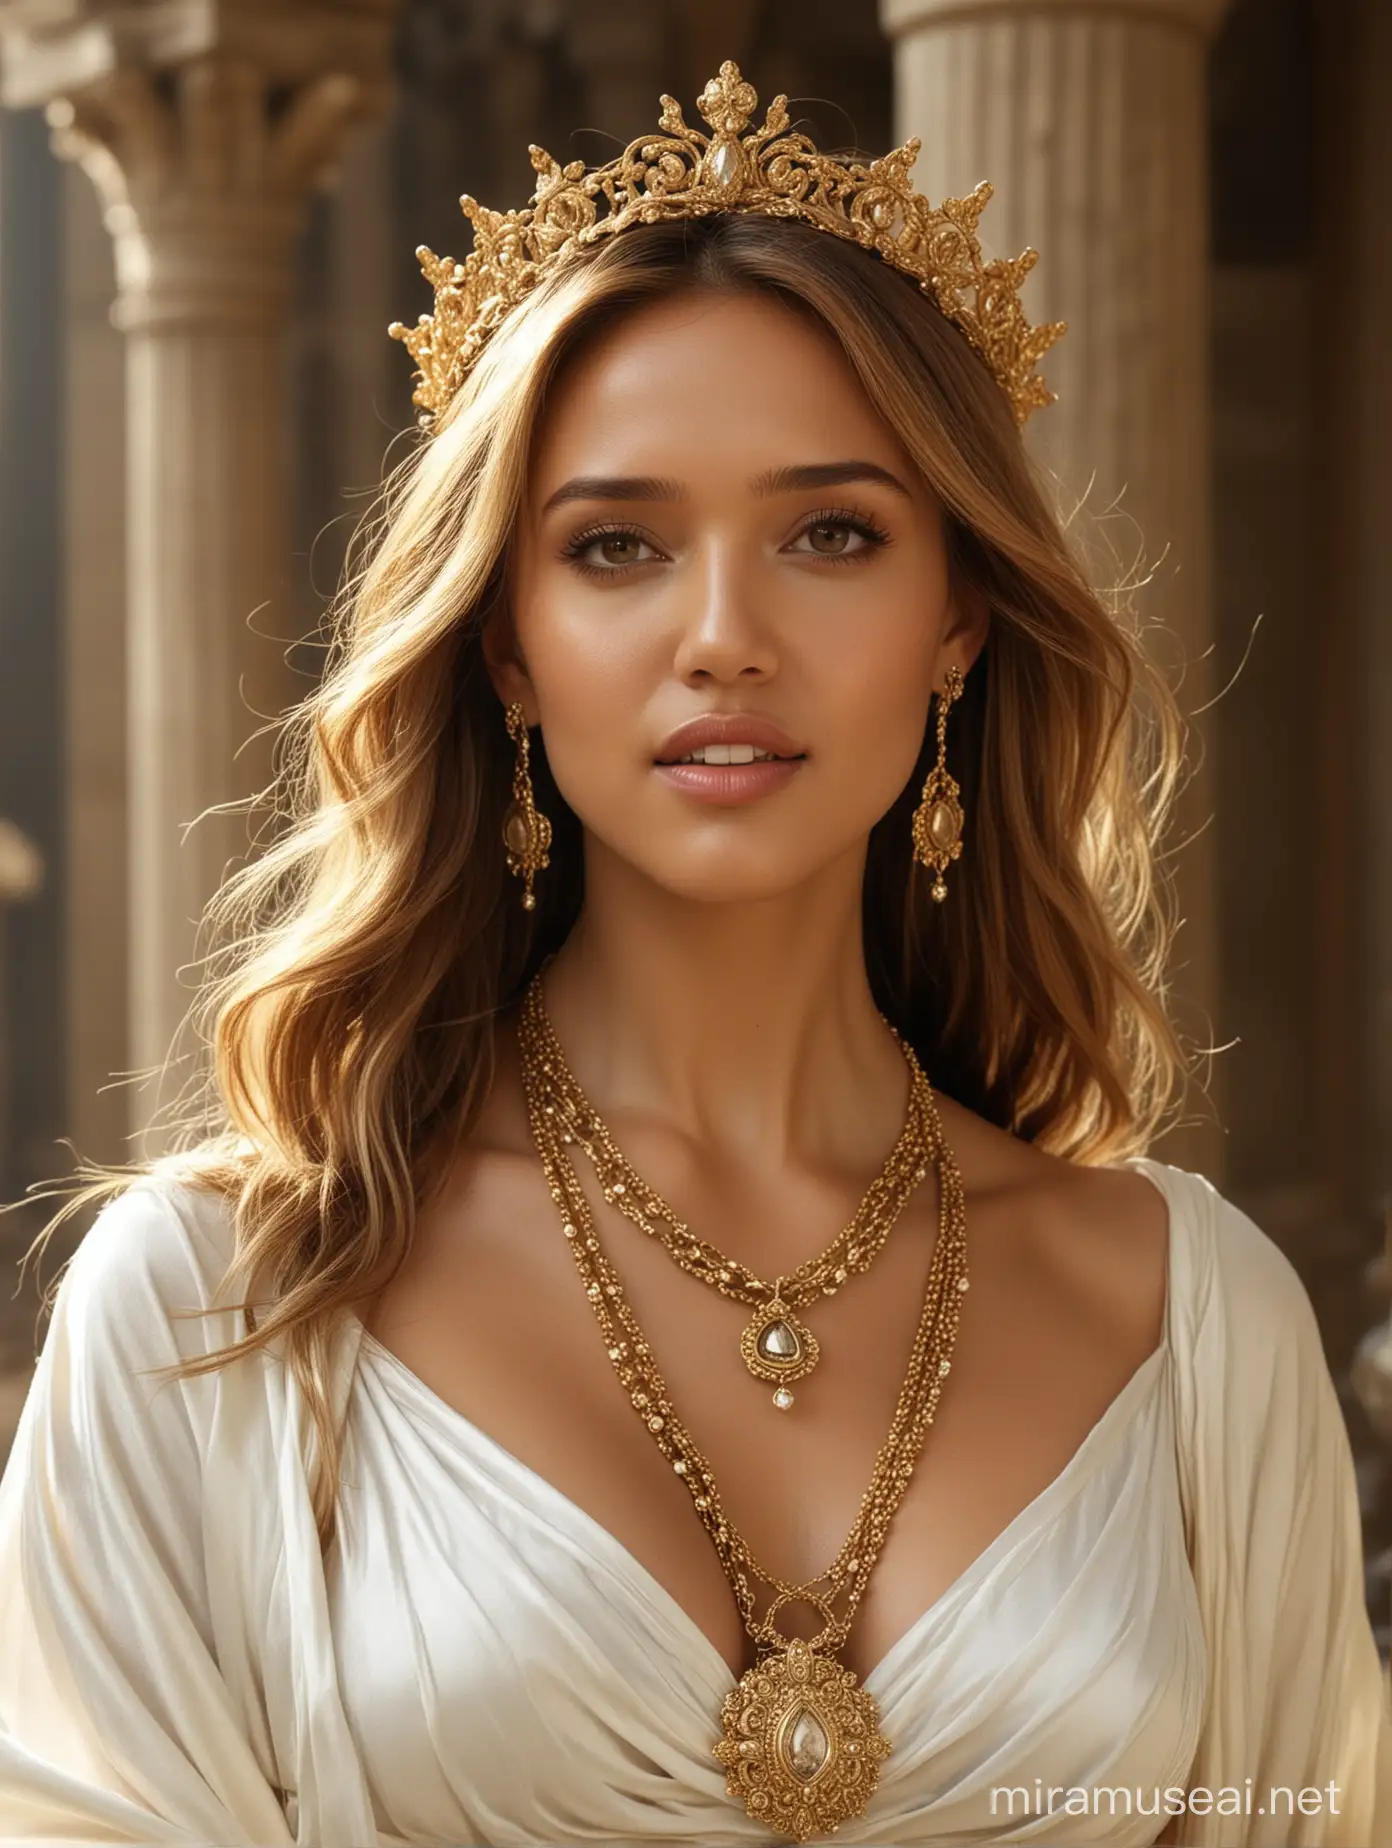 Jessica Alba as the goddess Freya come to life, 40 years old, sexy, alluring, enticing, ethereal, ultimate beauty, perfect body, knee-length portrait, large natural shaped breasts, expensive jewelry, Peplos, a spectral golden nimbus surrounds her, ultra sharp, random details, imperfection, skin texture, skin pores, in a temple dedicated to her, She is wearing attire befitting her status as a goddess of love and fertility, adorned in flowing robes that accentuate her figure, she is wearing ornate jewelry, such as her magical necklace, the Brísingamen, which adds to her radiant appearance.